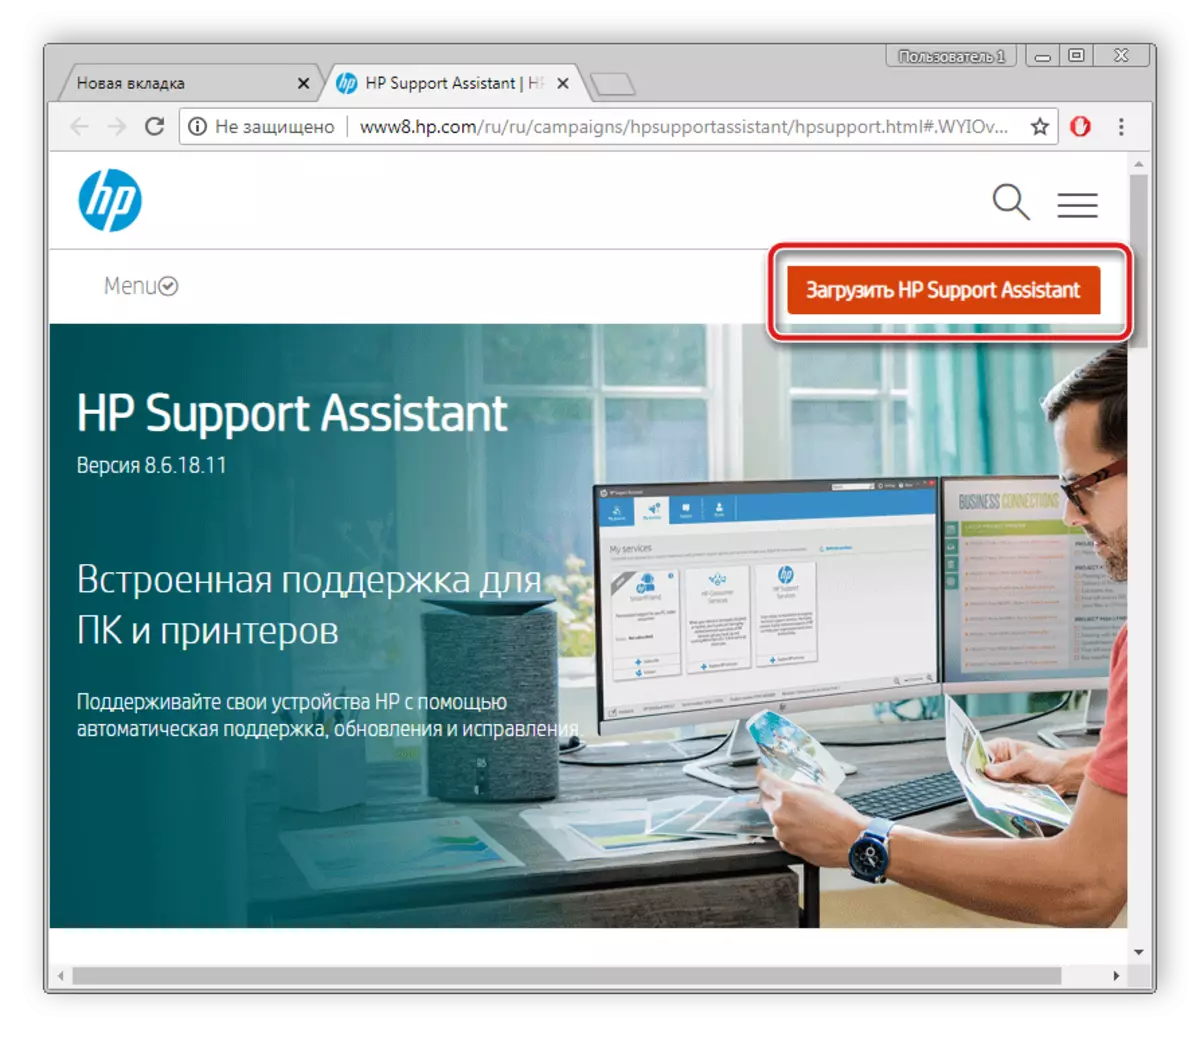 HP Support assistent aflaai bladsy